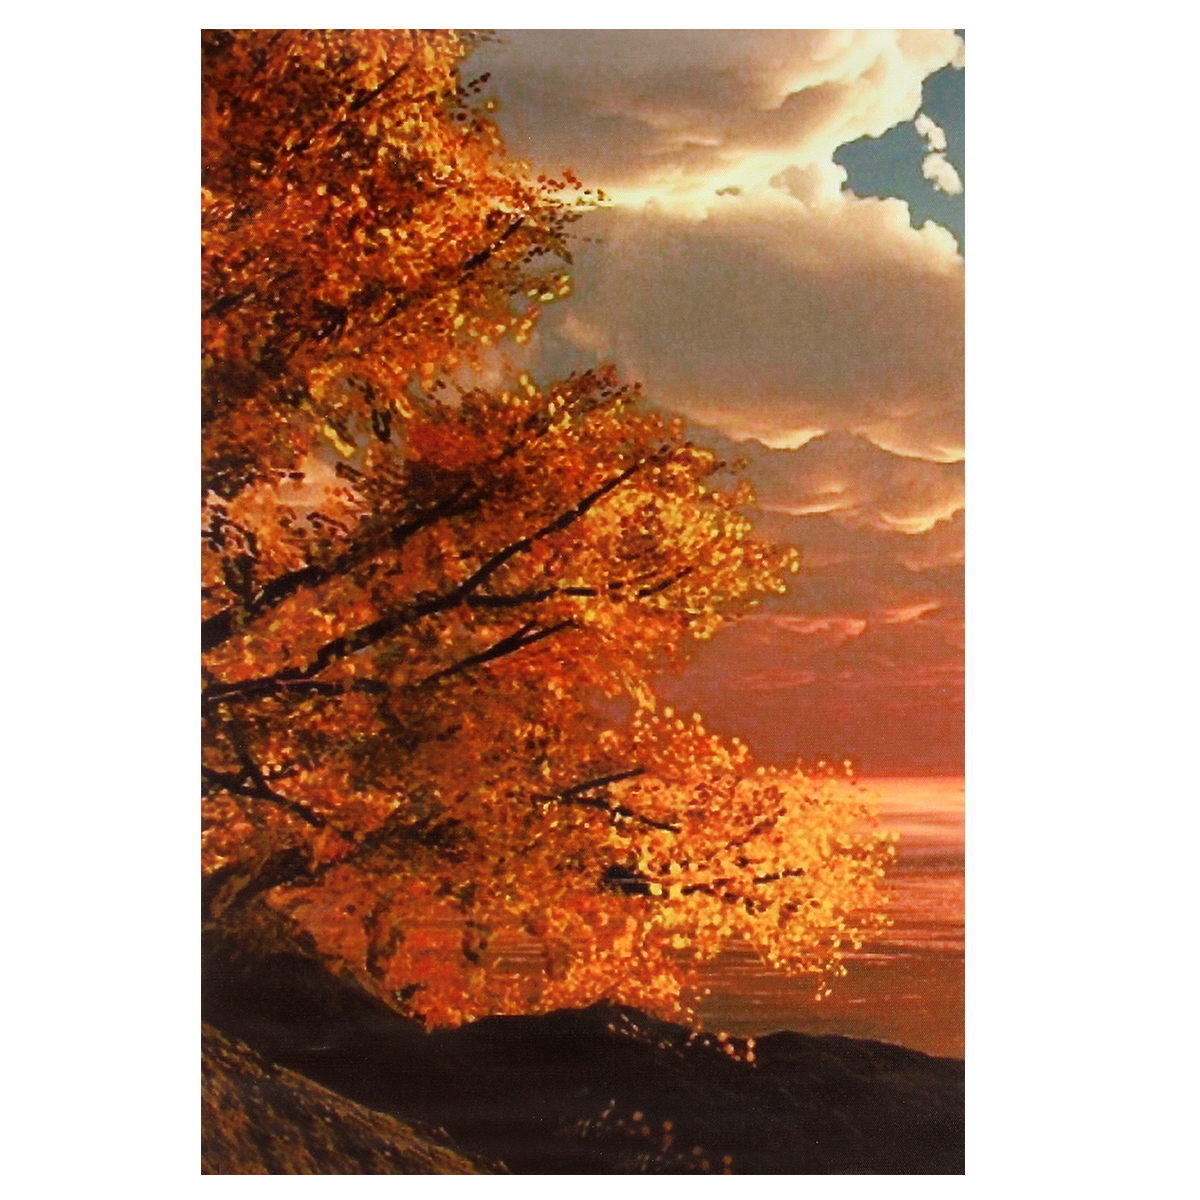 3-Cascade-Day-Sunset-Scene-Canvas-Painting-Decorative-Wall-Picture-Home-Decoration-Unframed-1117195